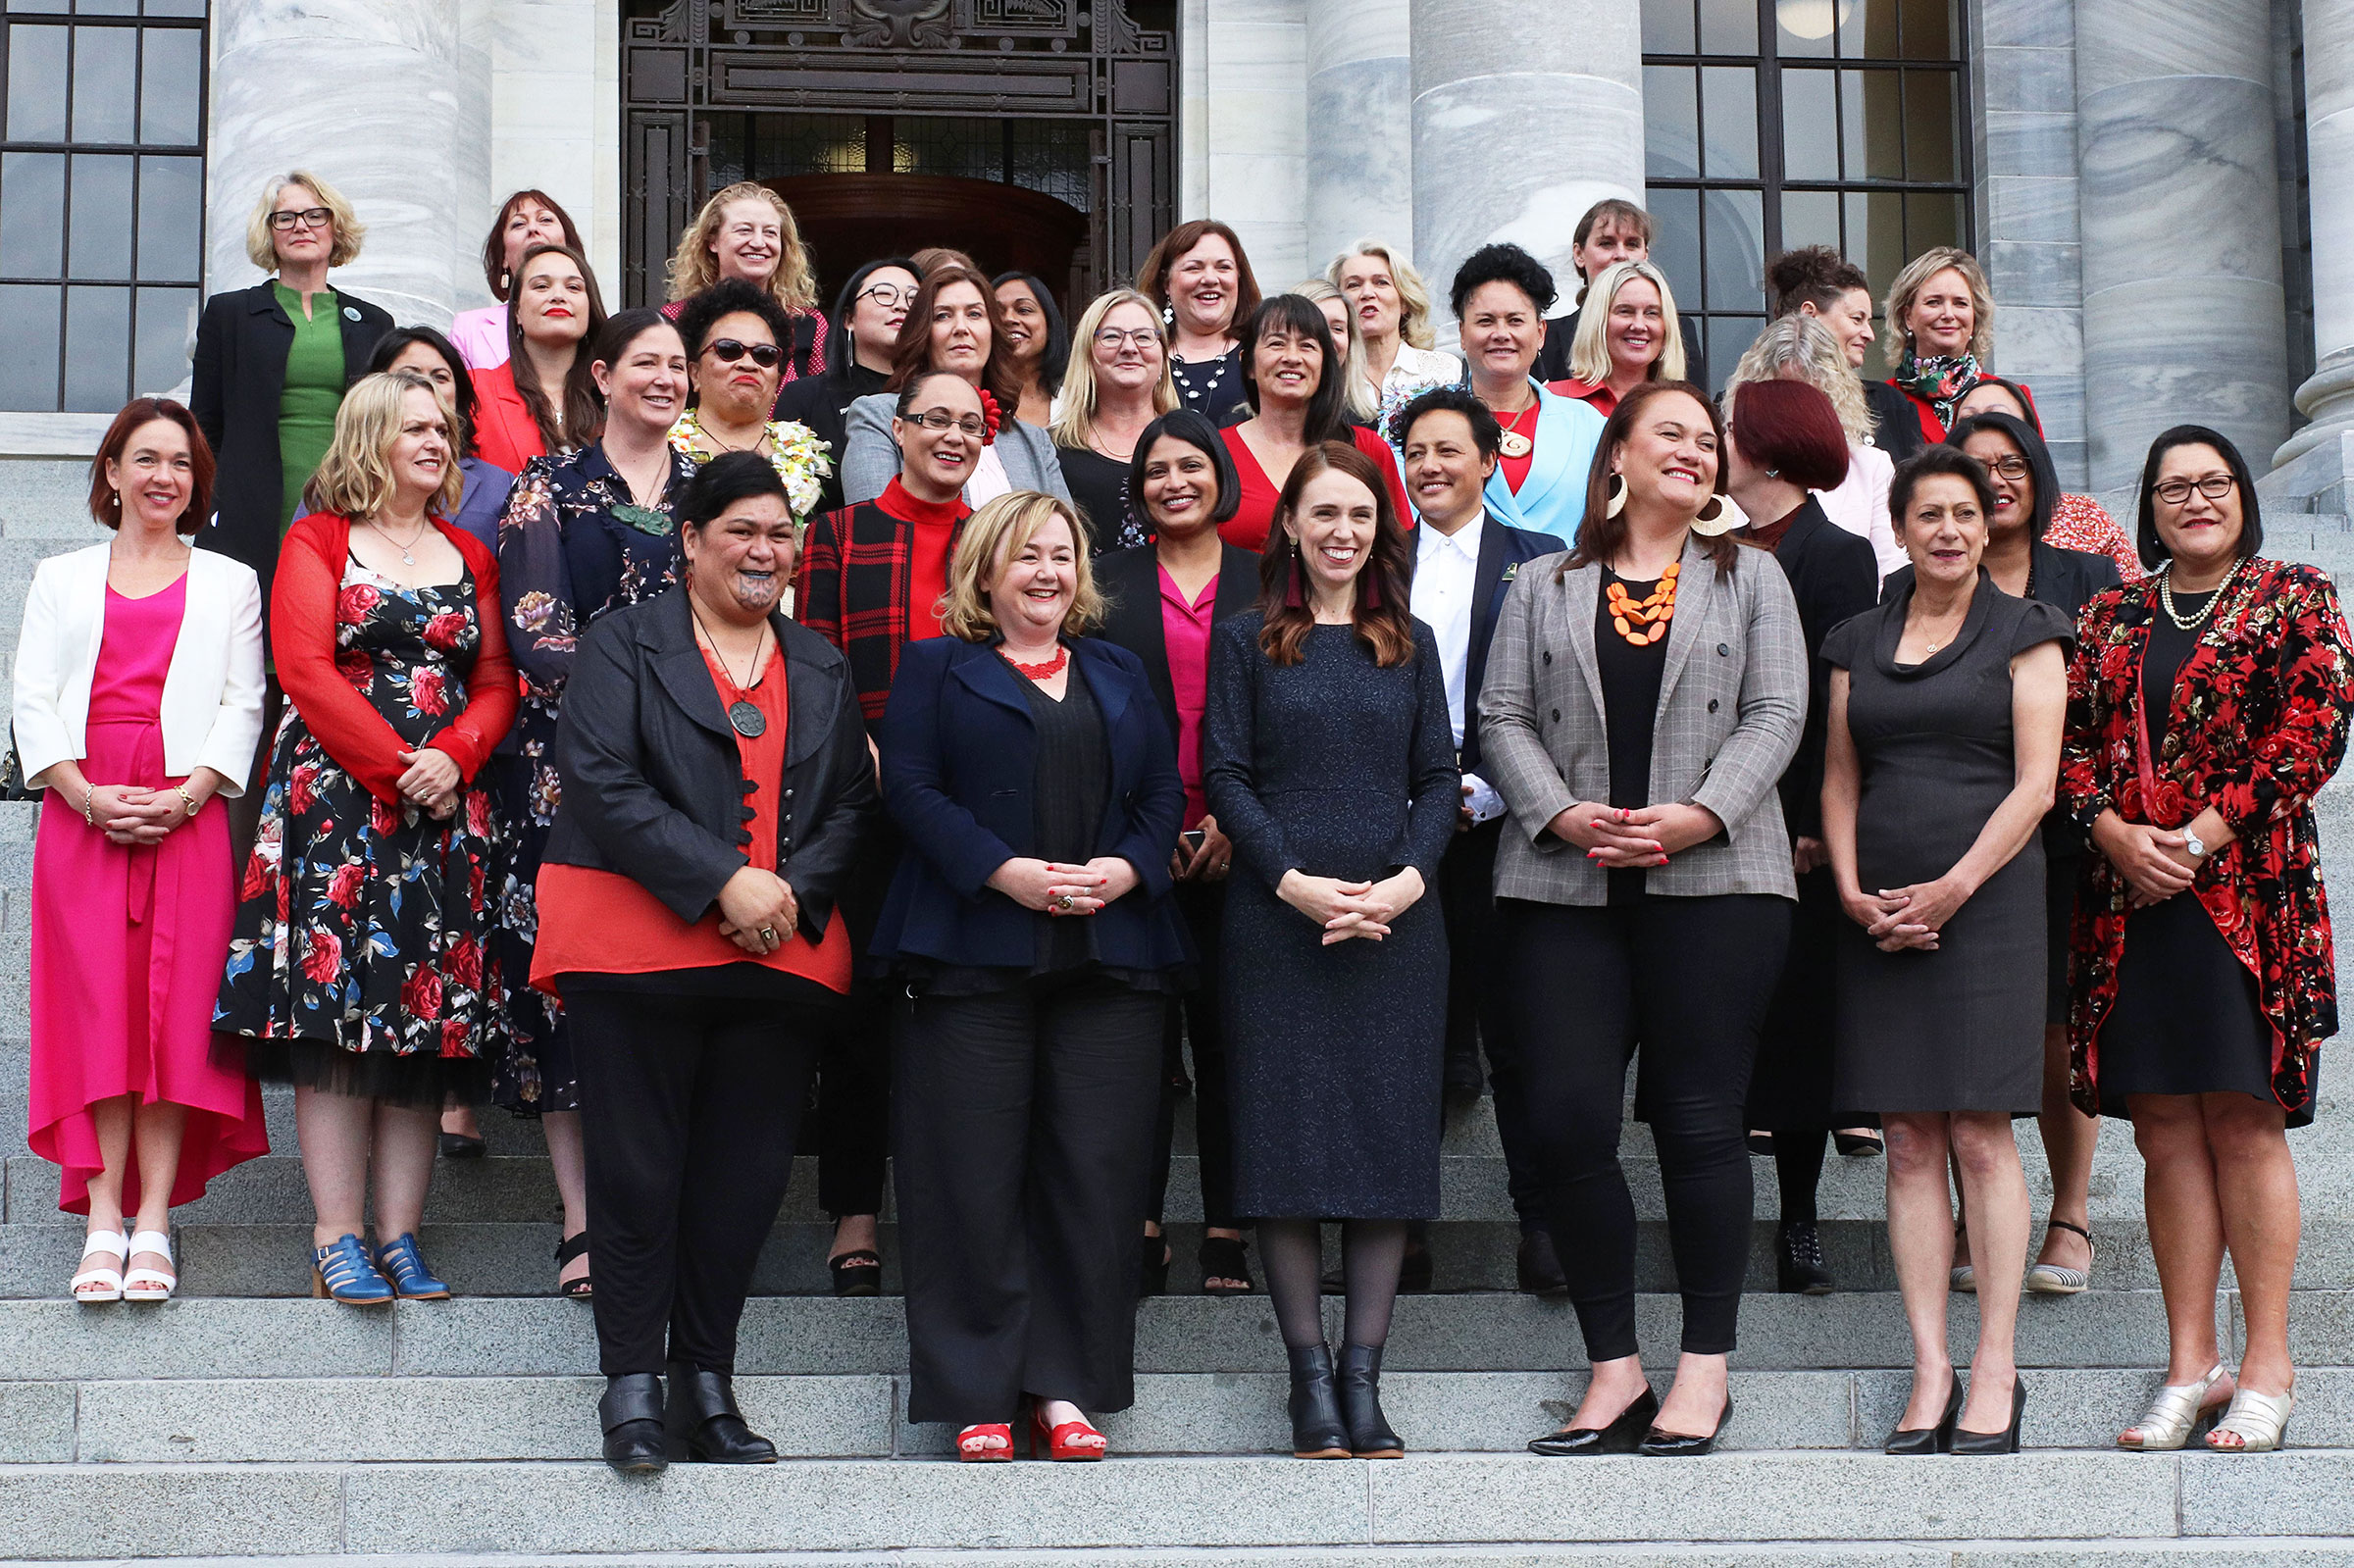 The New Zealand Labour Party’s female MPs on the steps of parliament on Nov. 24, 2020, in Wellington. (Lynn Grieveson— Newsroom/Getty Images)